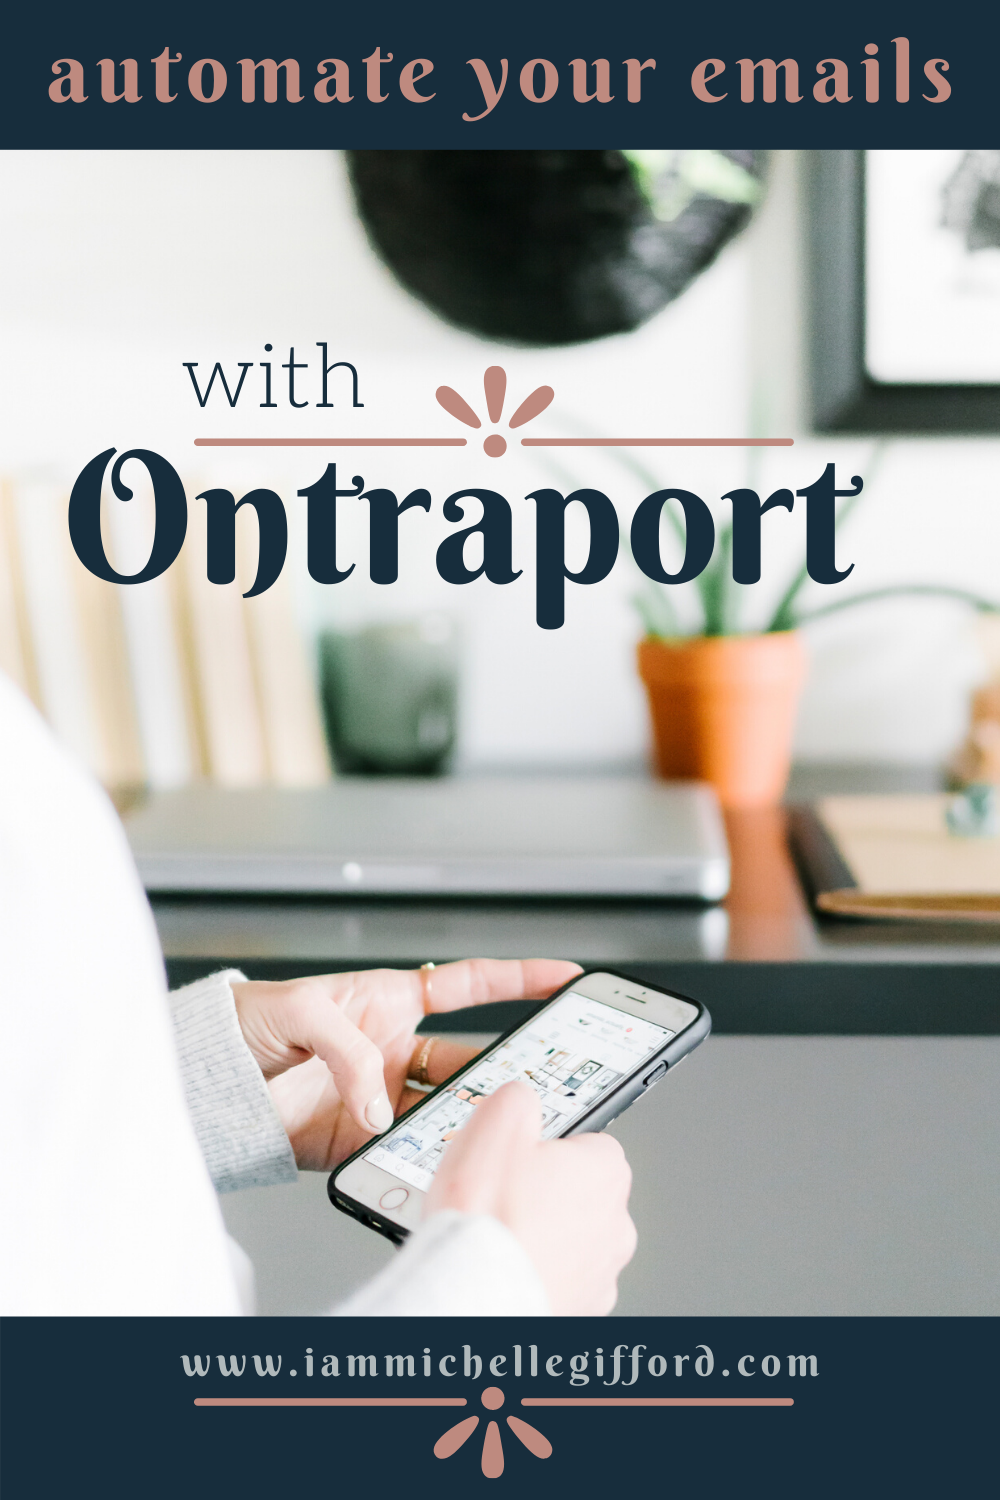 Using Ontraport to Automate my Email Marketing- Automate your emails www.iammichellegifford.com